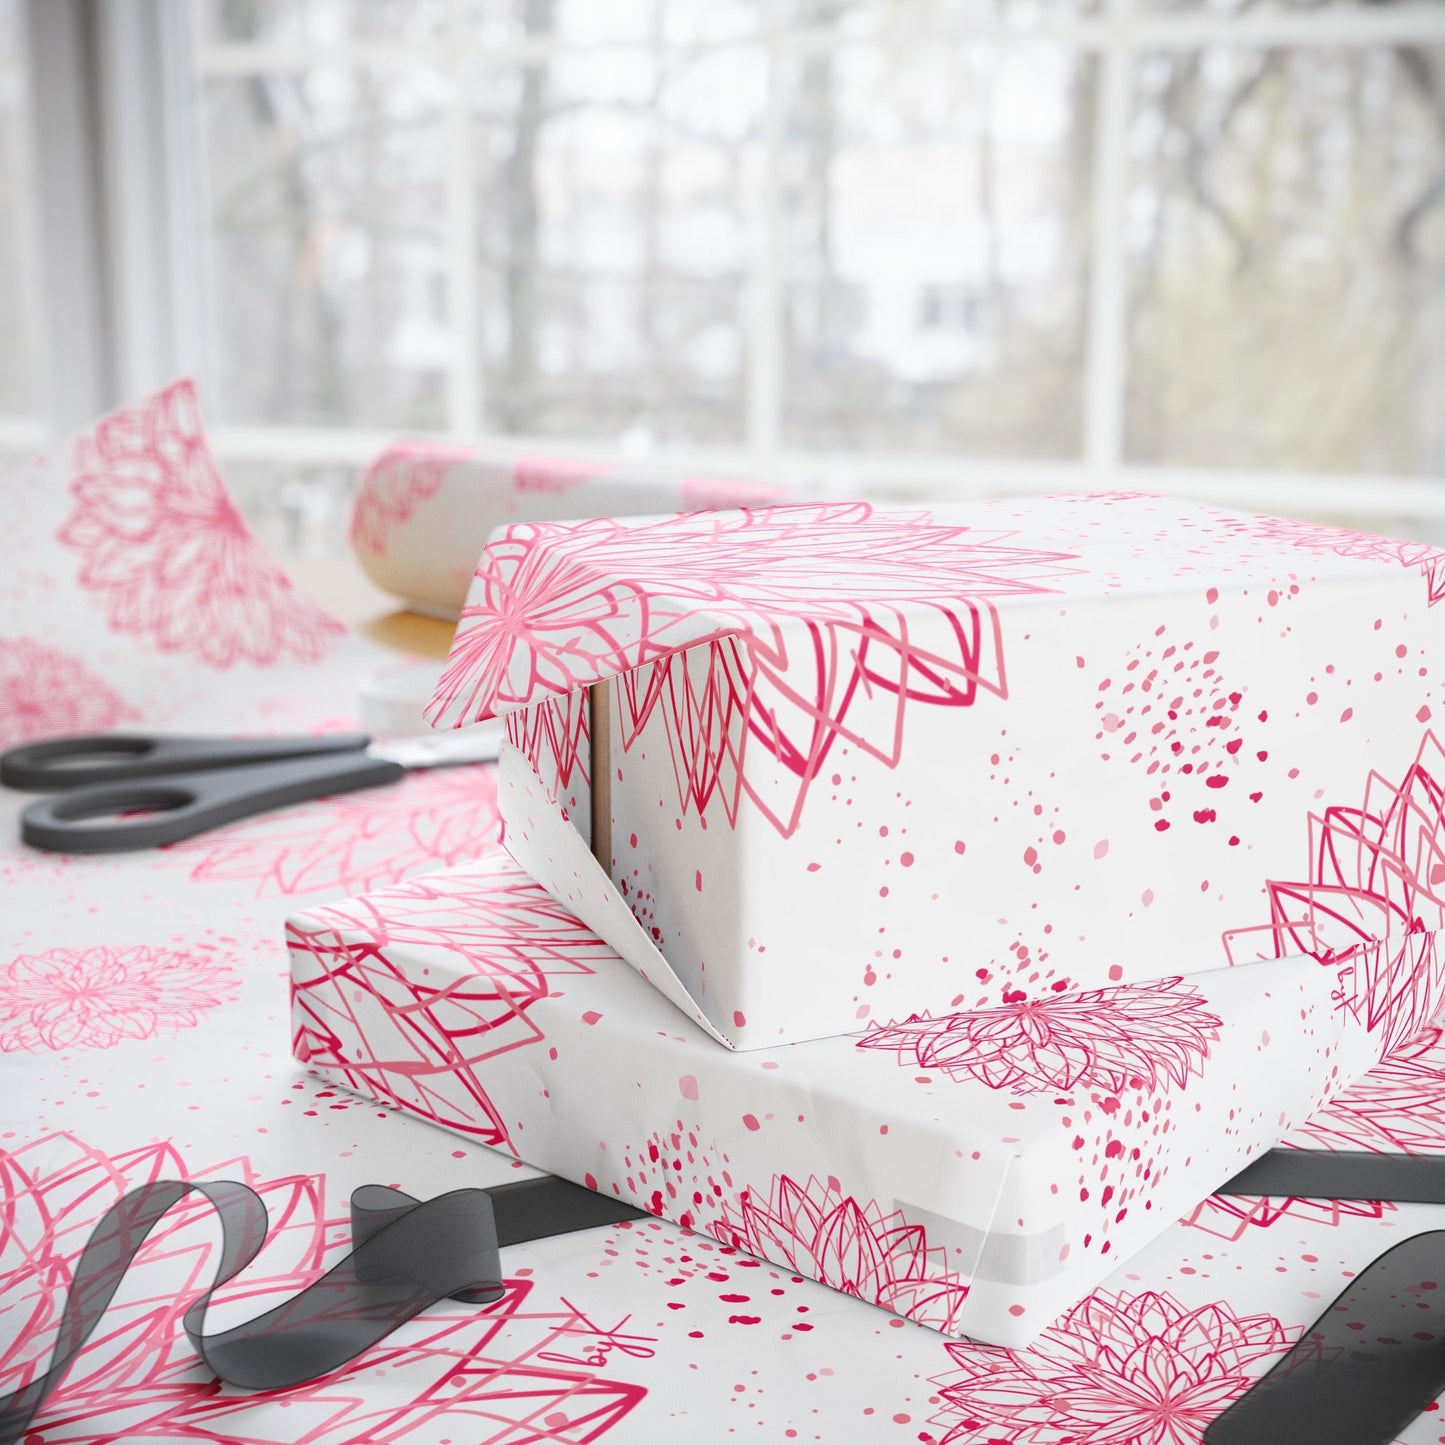 Designed byKath.com Pink and white floral Wrapping Paper in various sizes